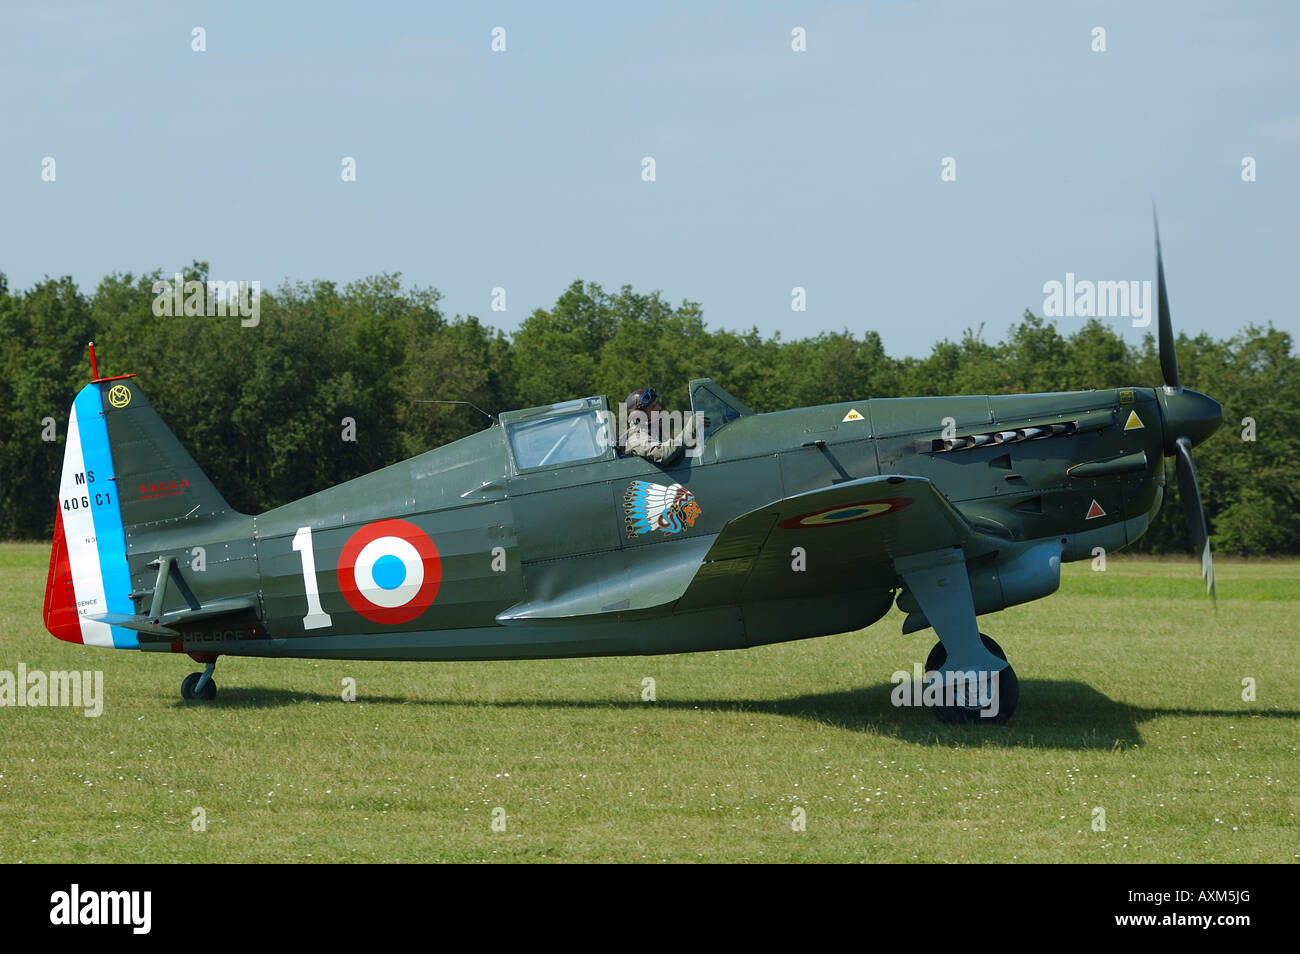 Old WWII fighter  Morane MS-406 (also ref D-3801)  during french vintage air show, La Ferte Alais Stock Photo